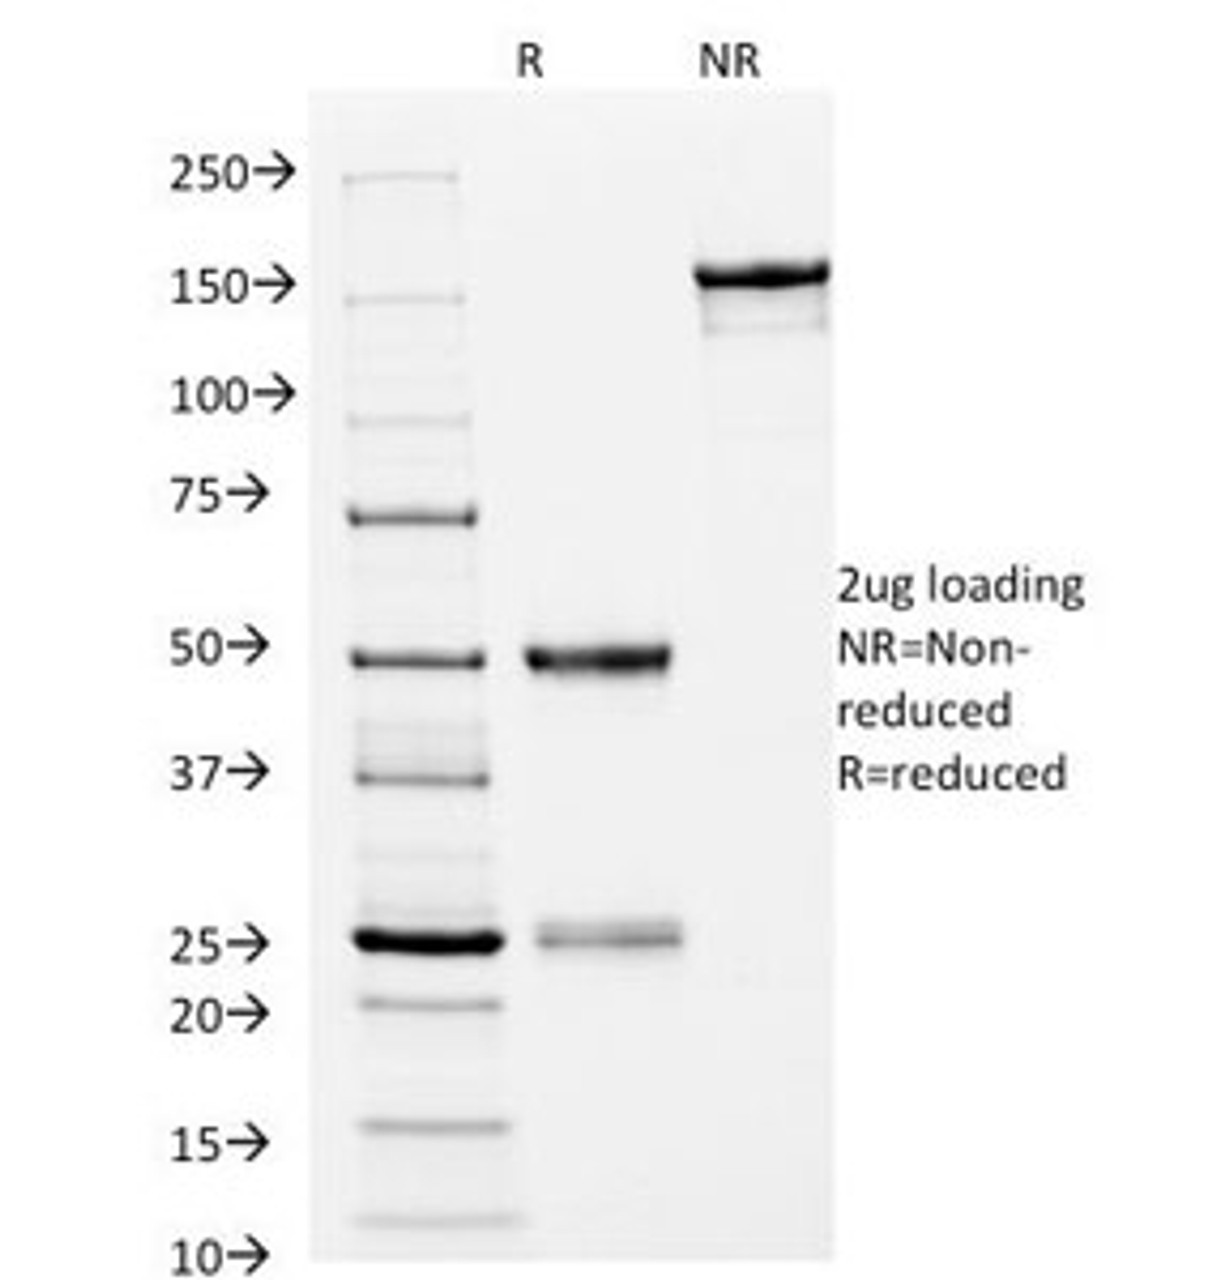 SDS-PAGE Analysis of Purified, BSA-Free HLA-DRB1 Antibody (clone L243) . Confirmation of Integrity and Purity of the Antibody.